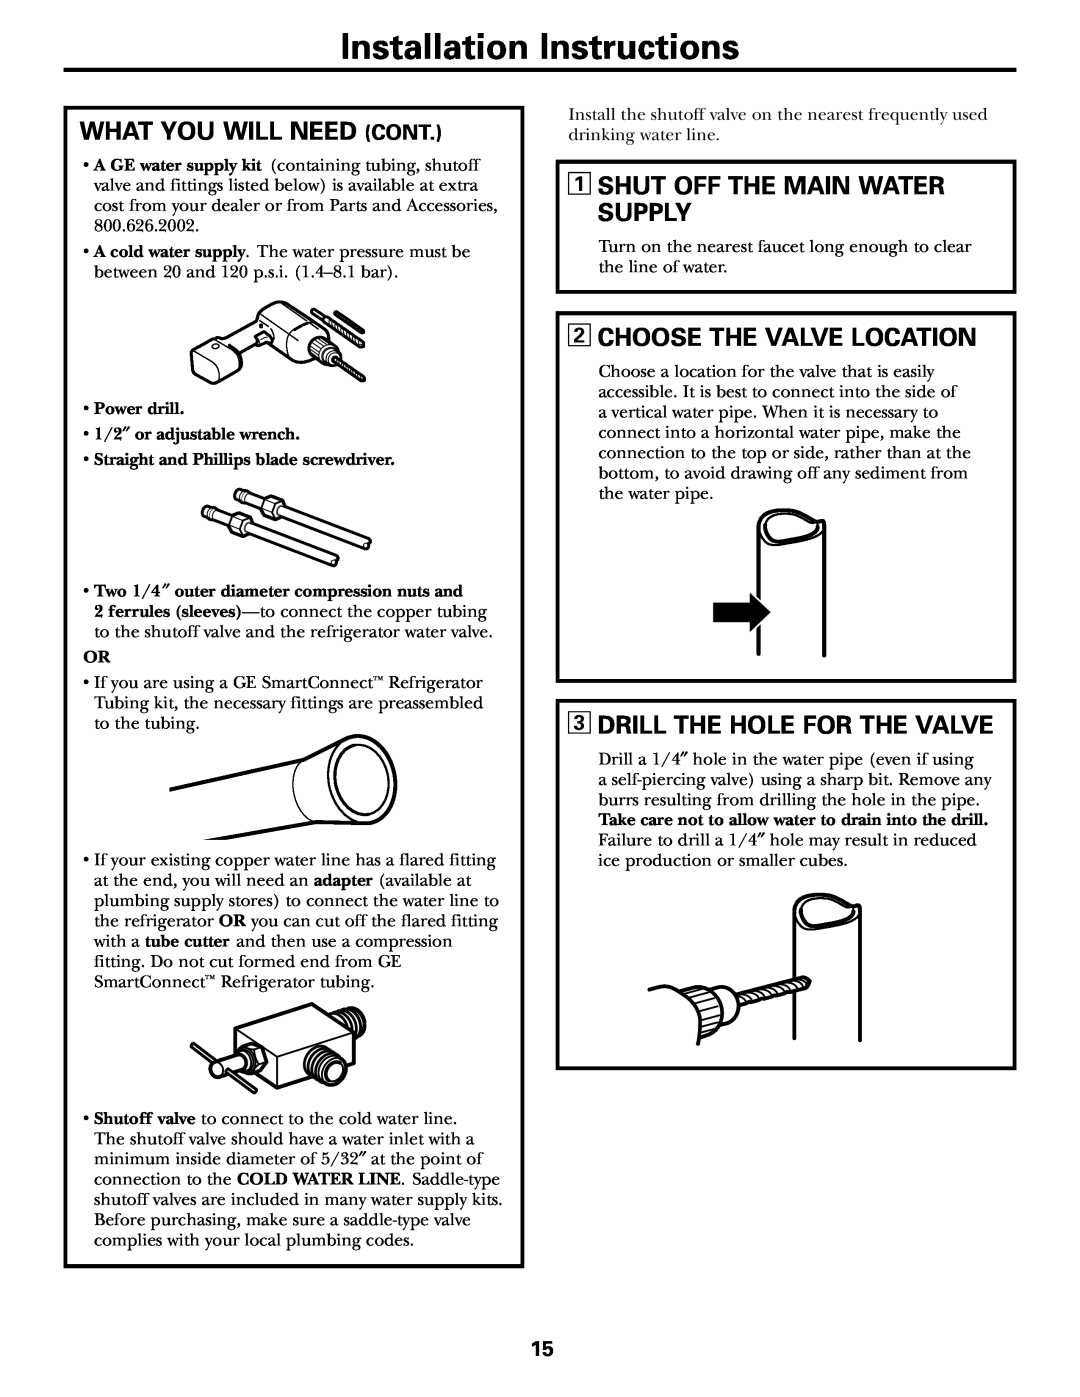 LG Electronics 25, 22 owner manual What You Will Need Cont, 1SHUT OFF THE MAIN WATER SUPPLY, 2CHOOSE THE VALVE LOCATION 